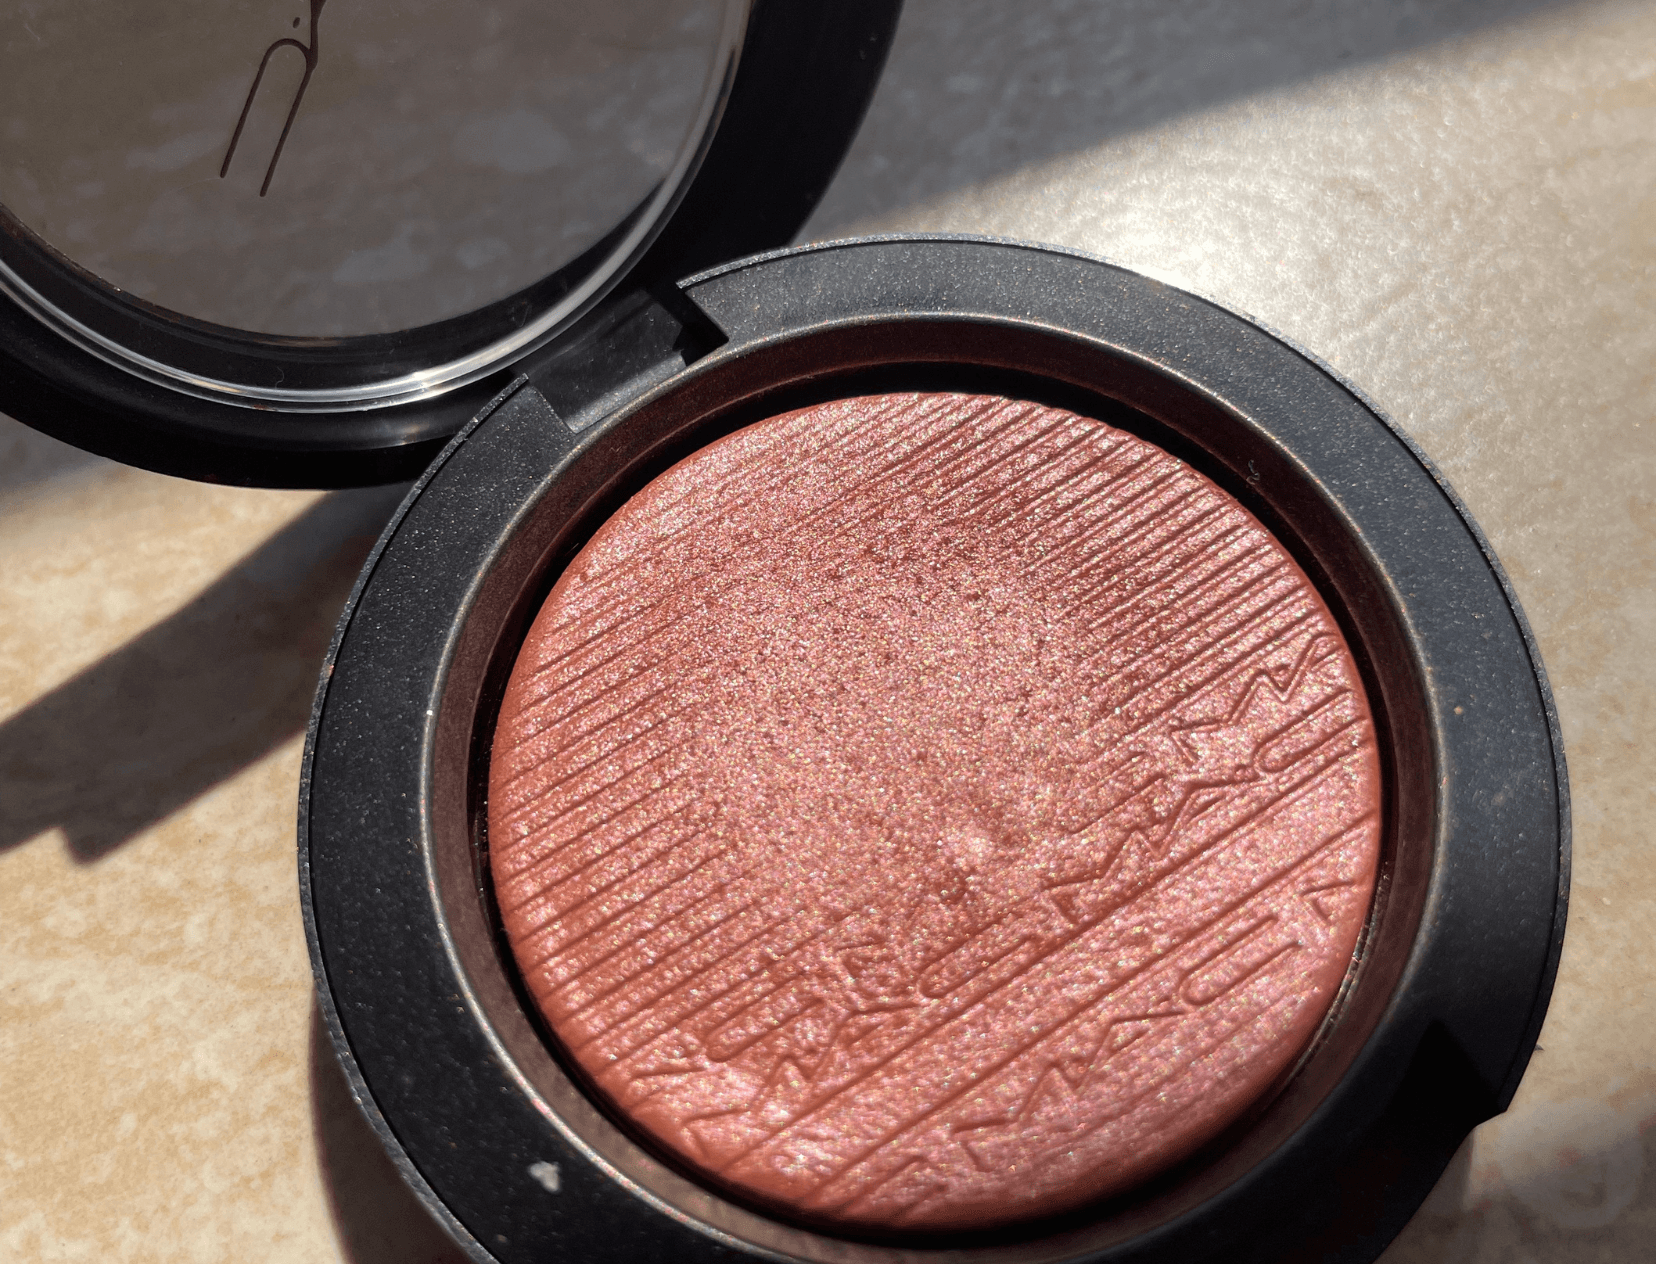 From Clean Girl To Sugar Plum Makeup, This MAC Compact Does It All!